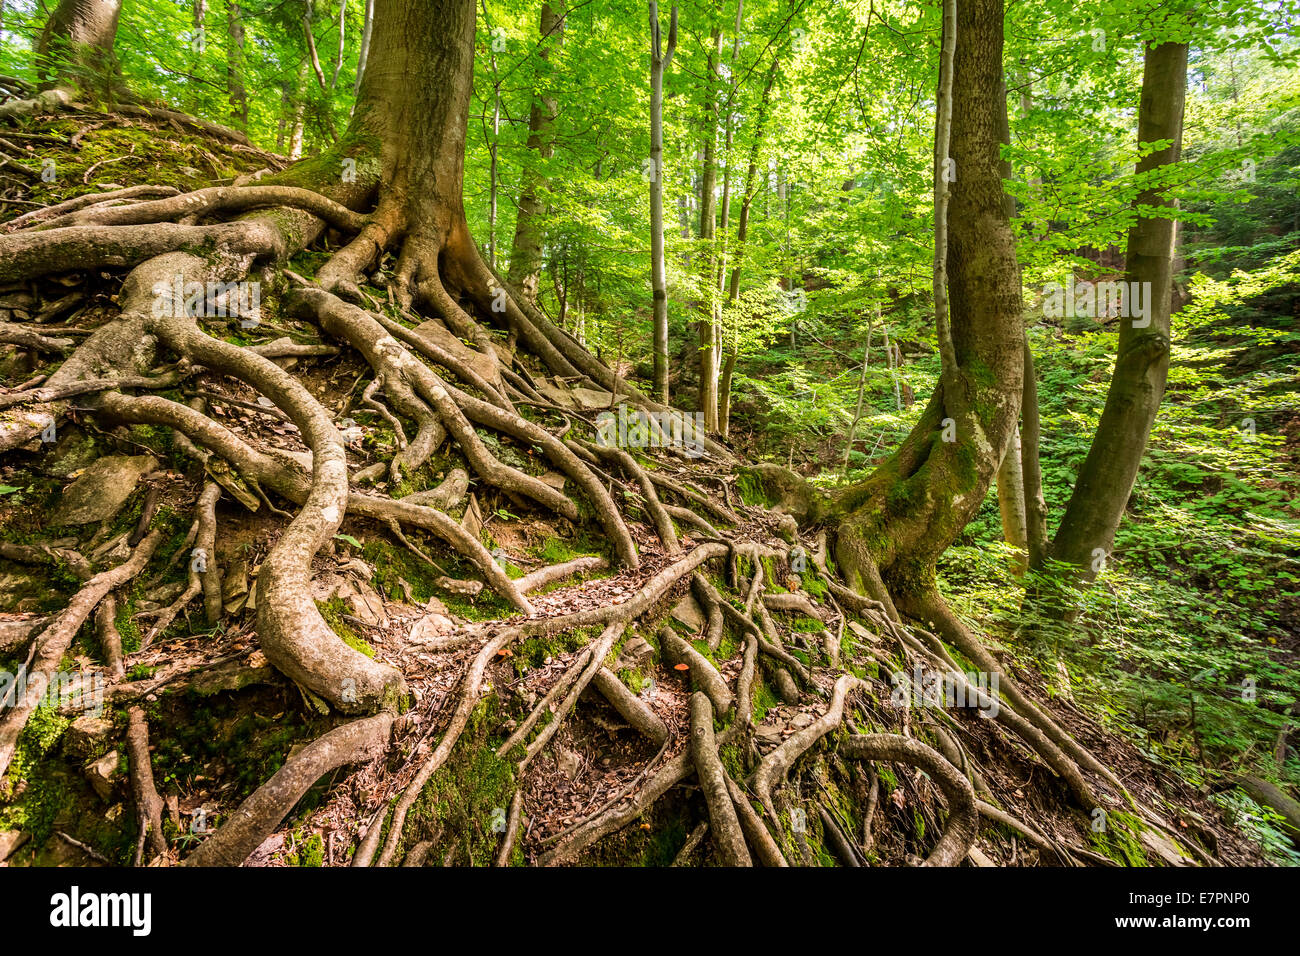 Tangled roots of trees in the forest Stock Photo